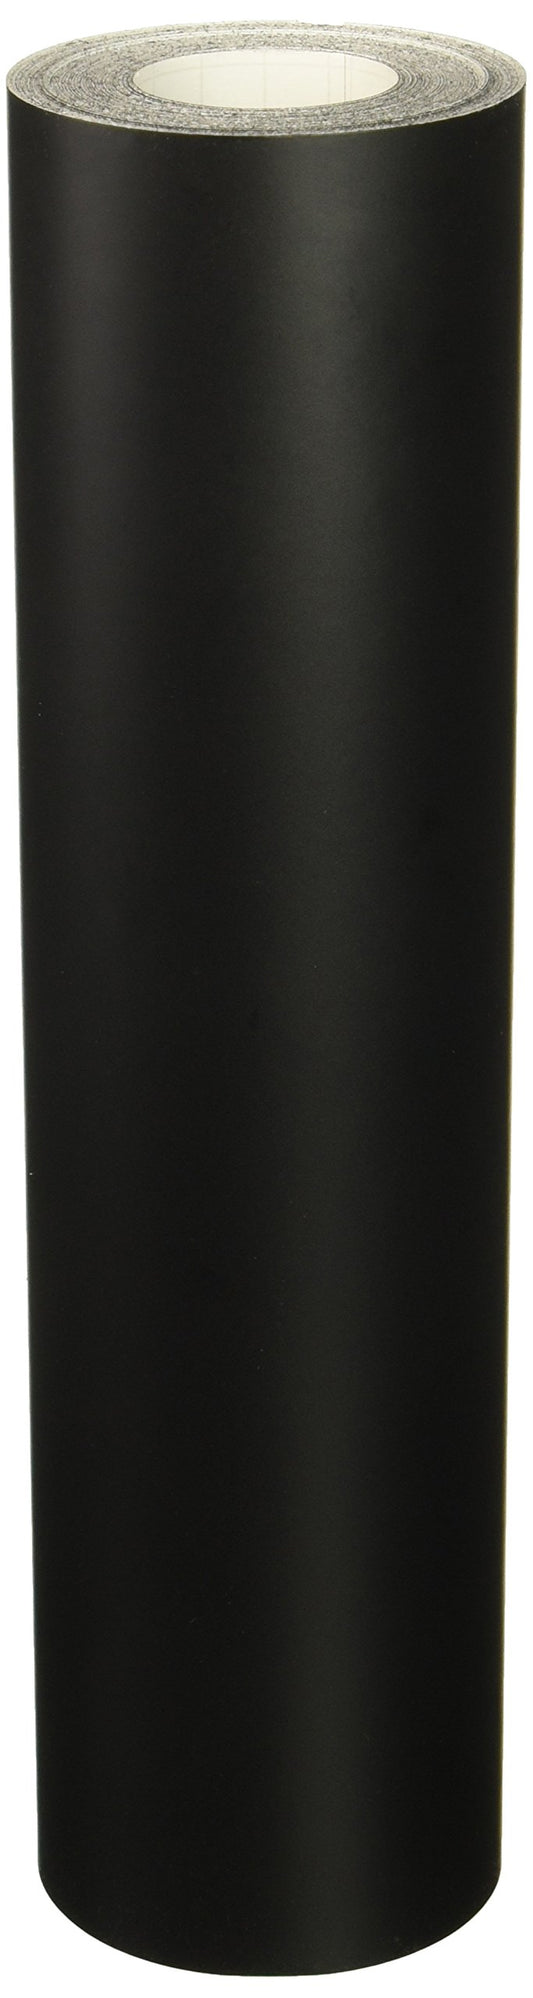 Roll of ORACAL 651 Matte Black Vinyl for Craft Cutters and Vinyl Sign Cutters (12"x50FT)